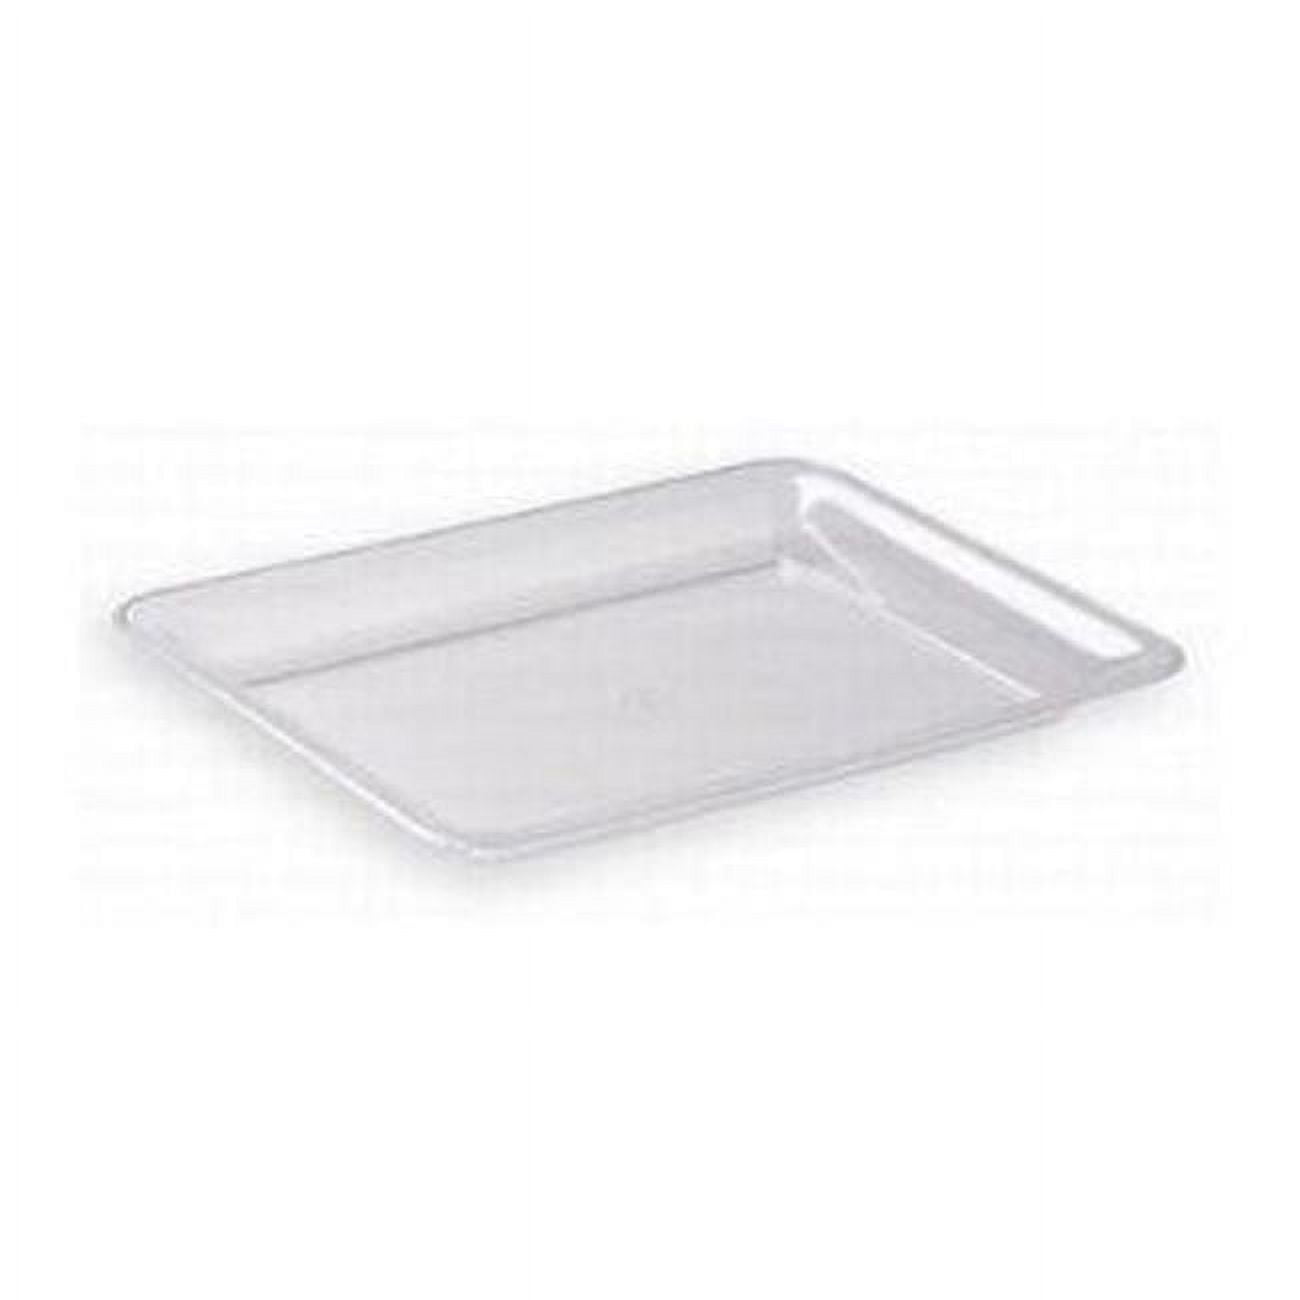 Mpi12186c Pec Clear 12 X 18 In. Sovereign Rectangular Tray - Case Of 20